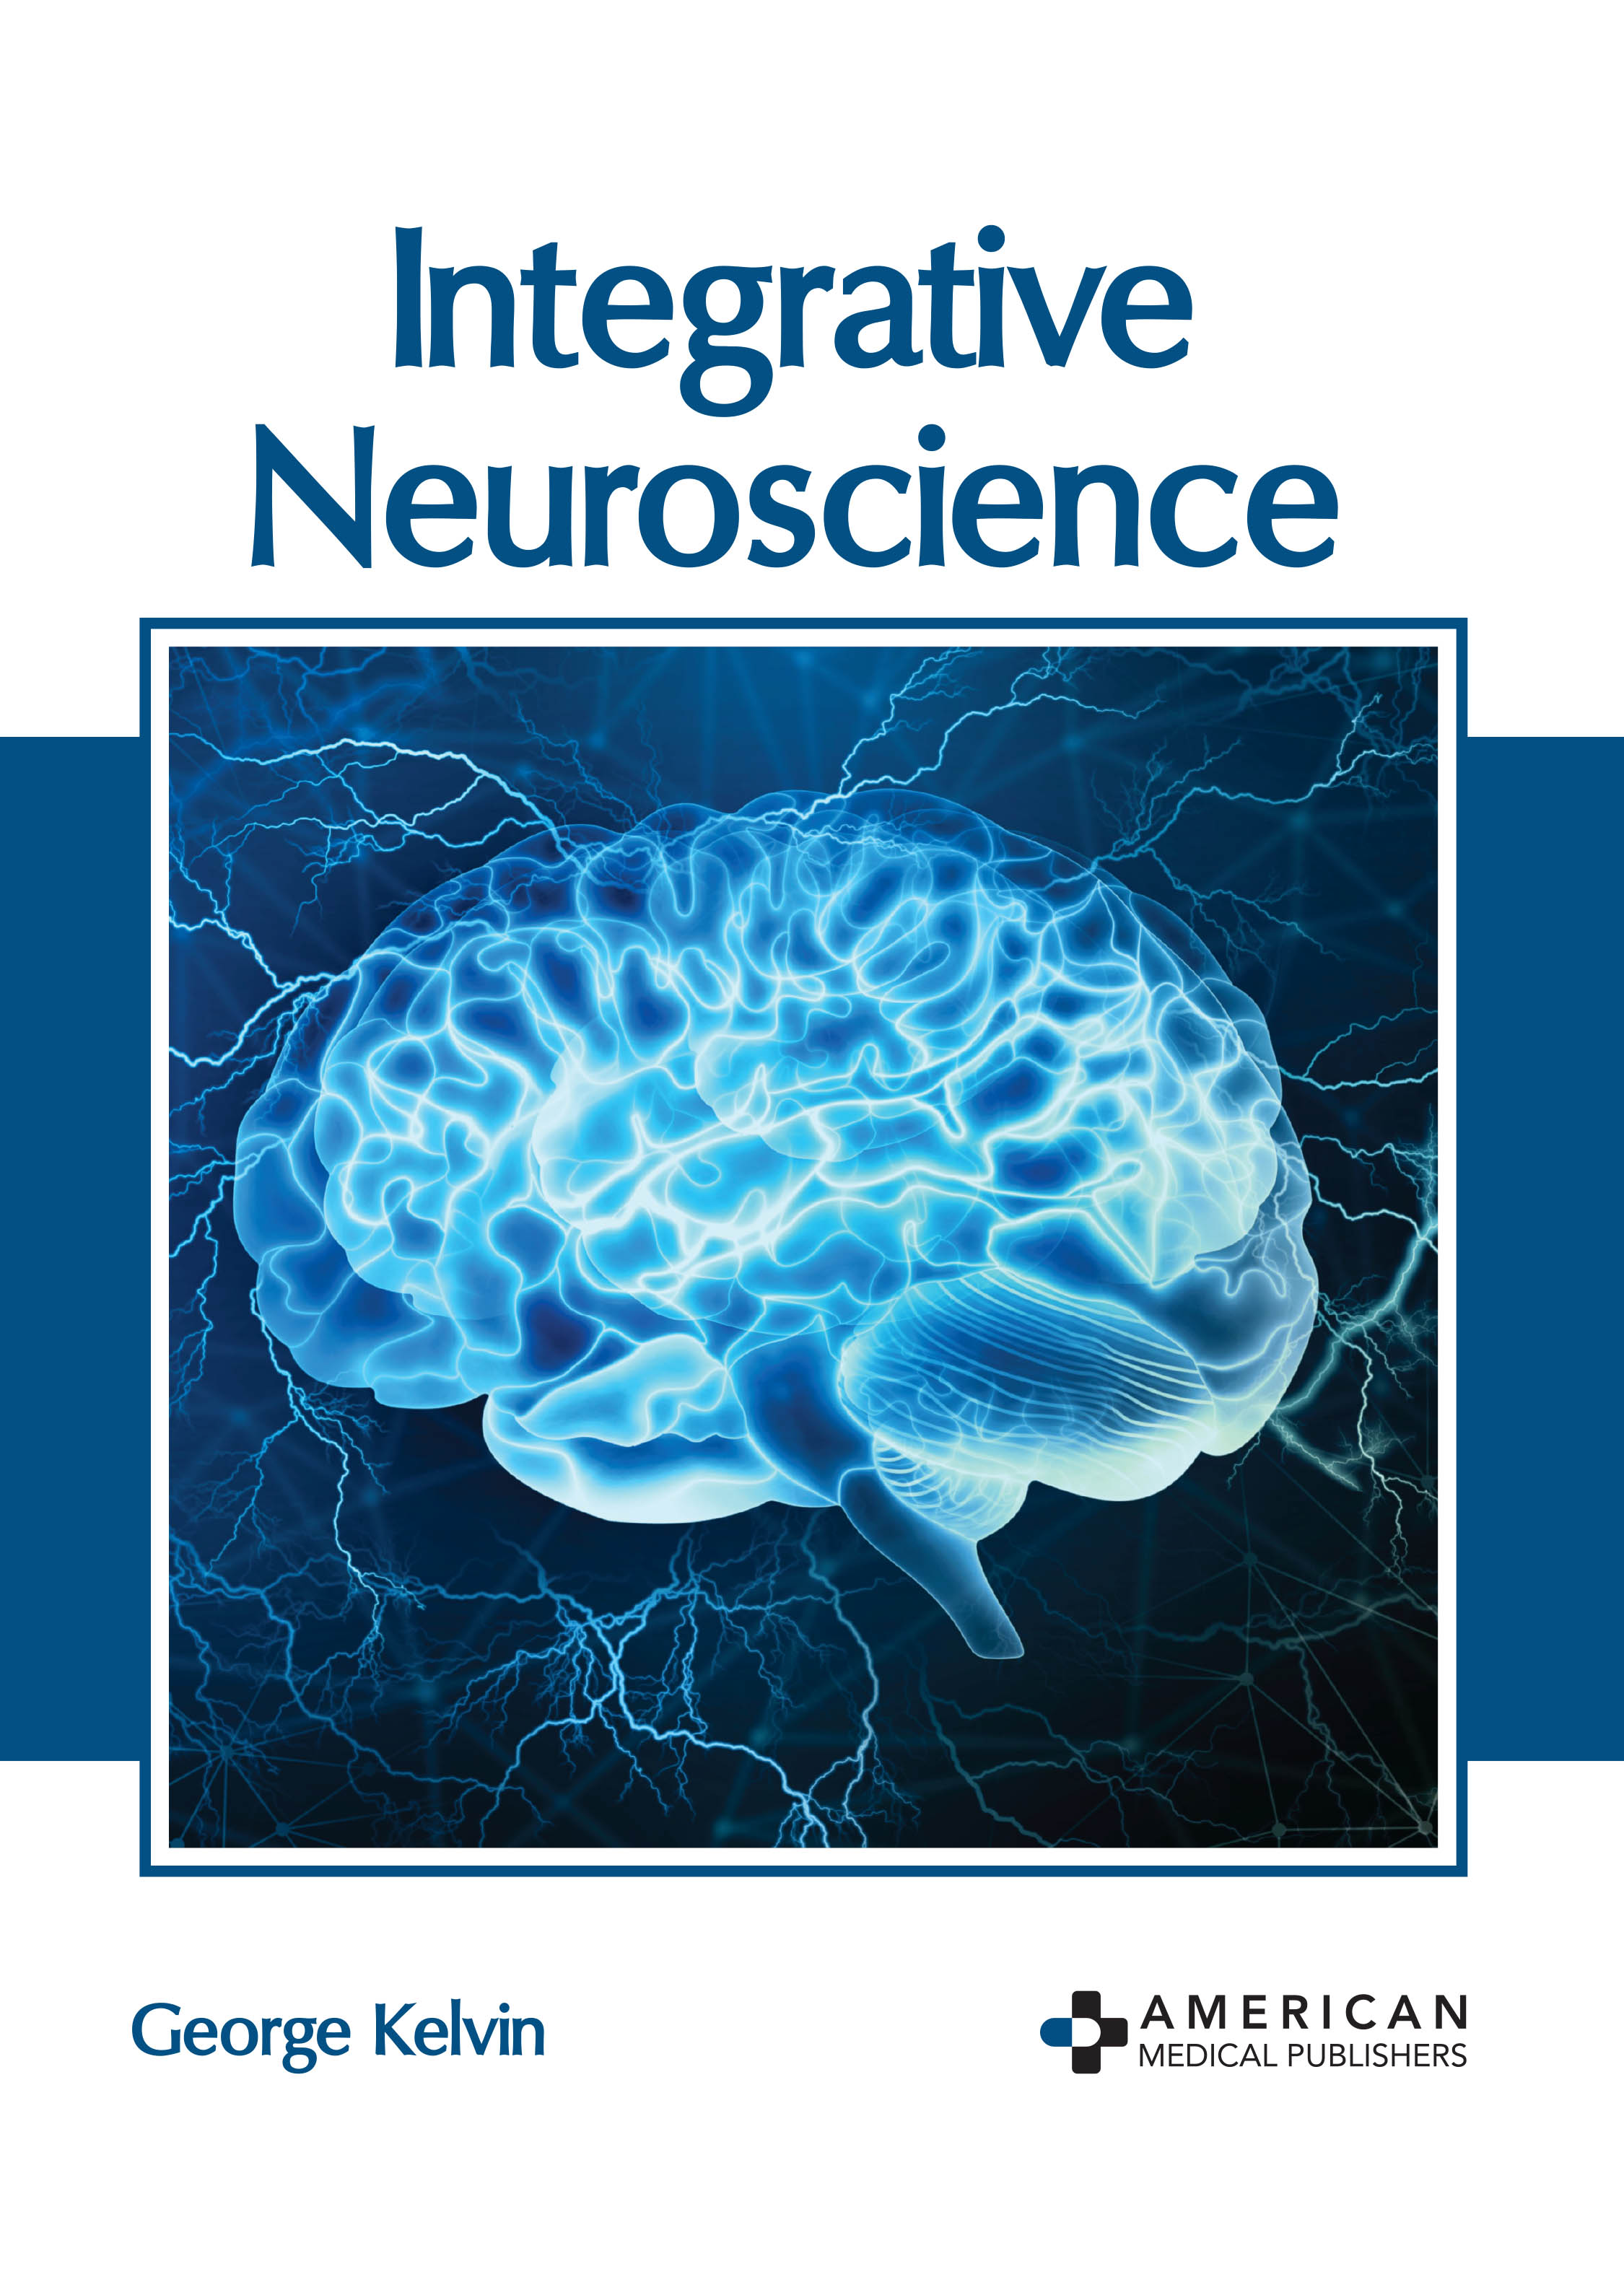 
exclusive-publishers/american-medical-publishers/integrative-neuroscience-9781639273010